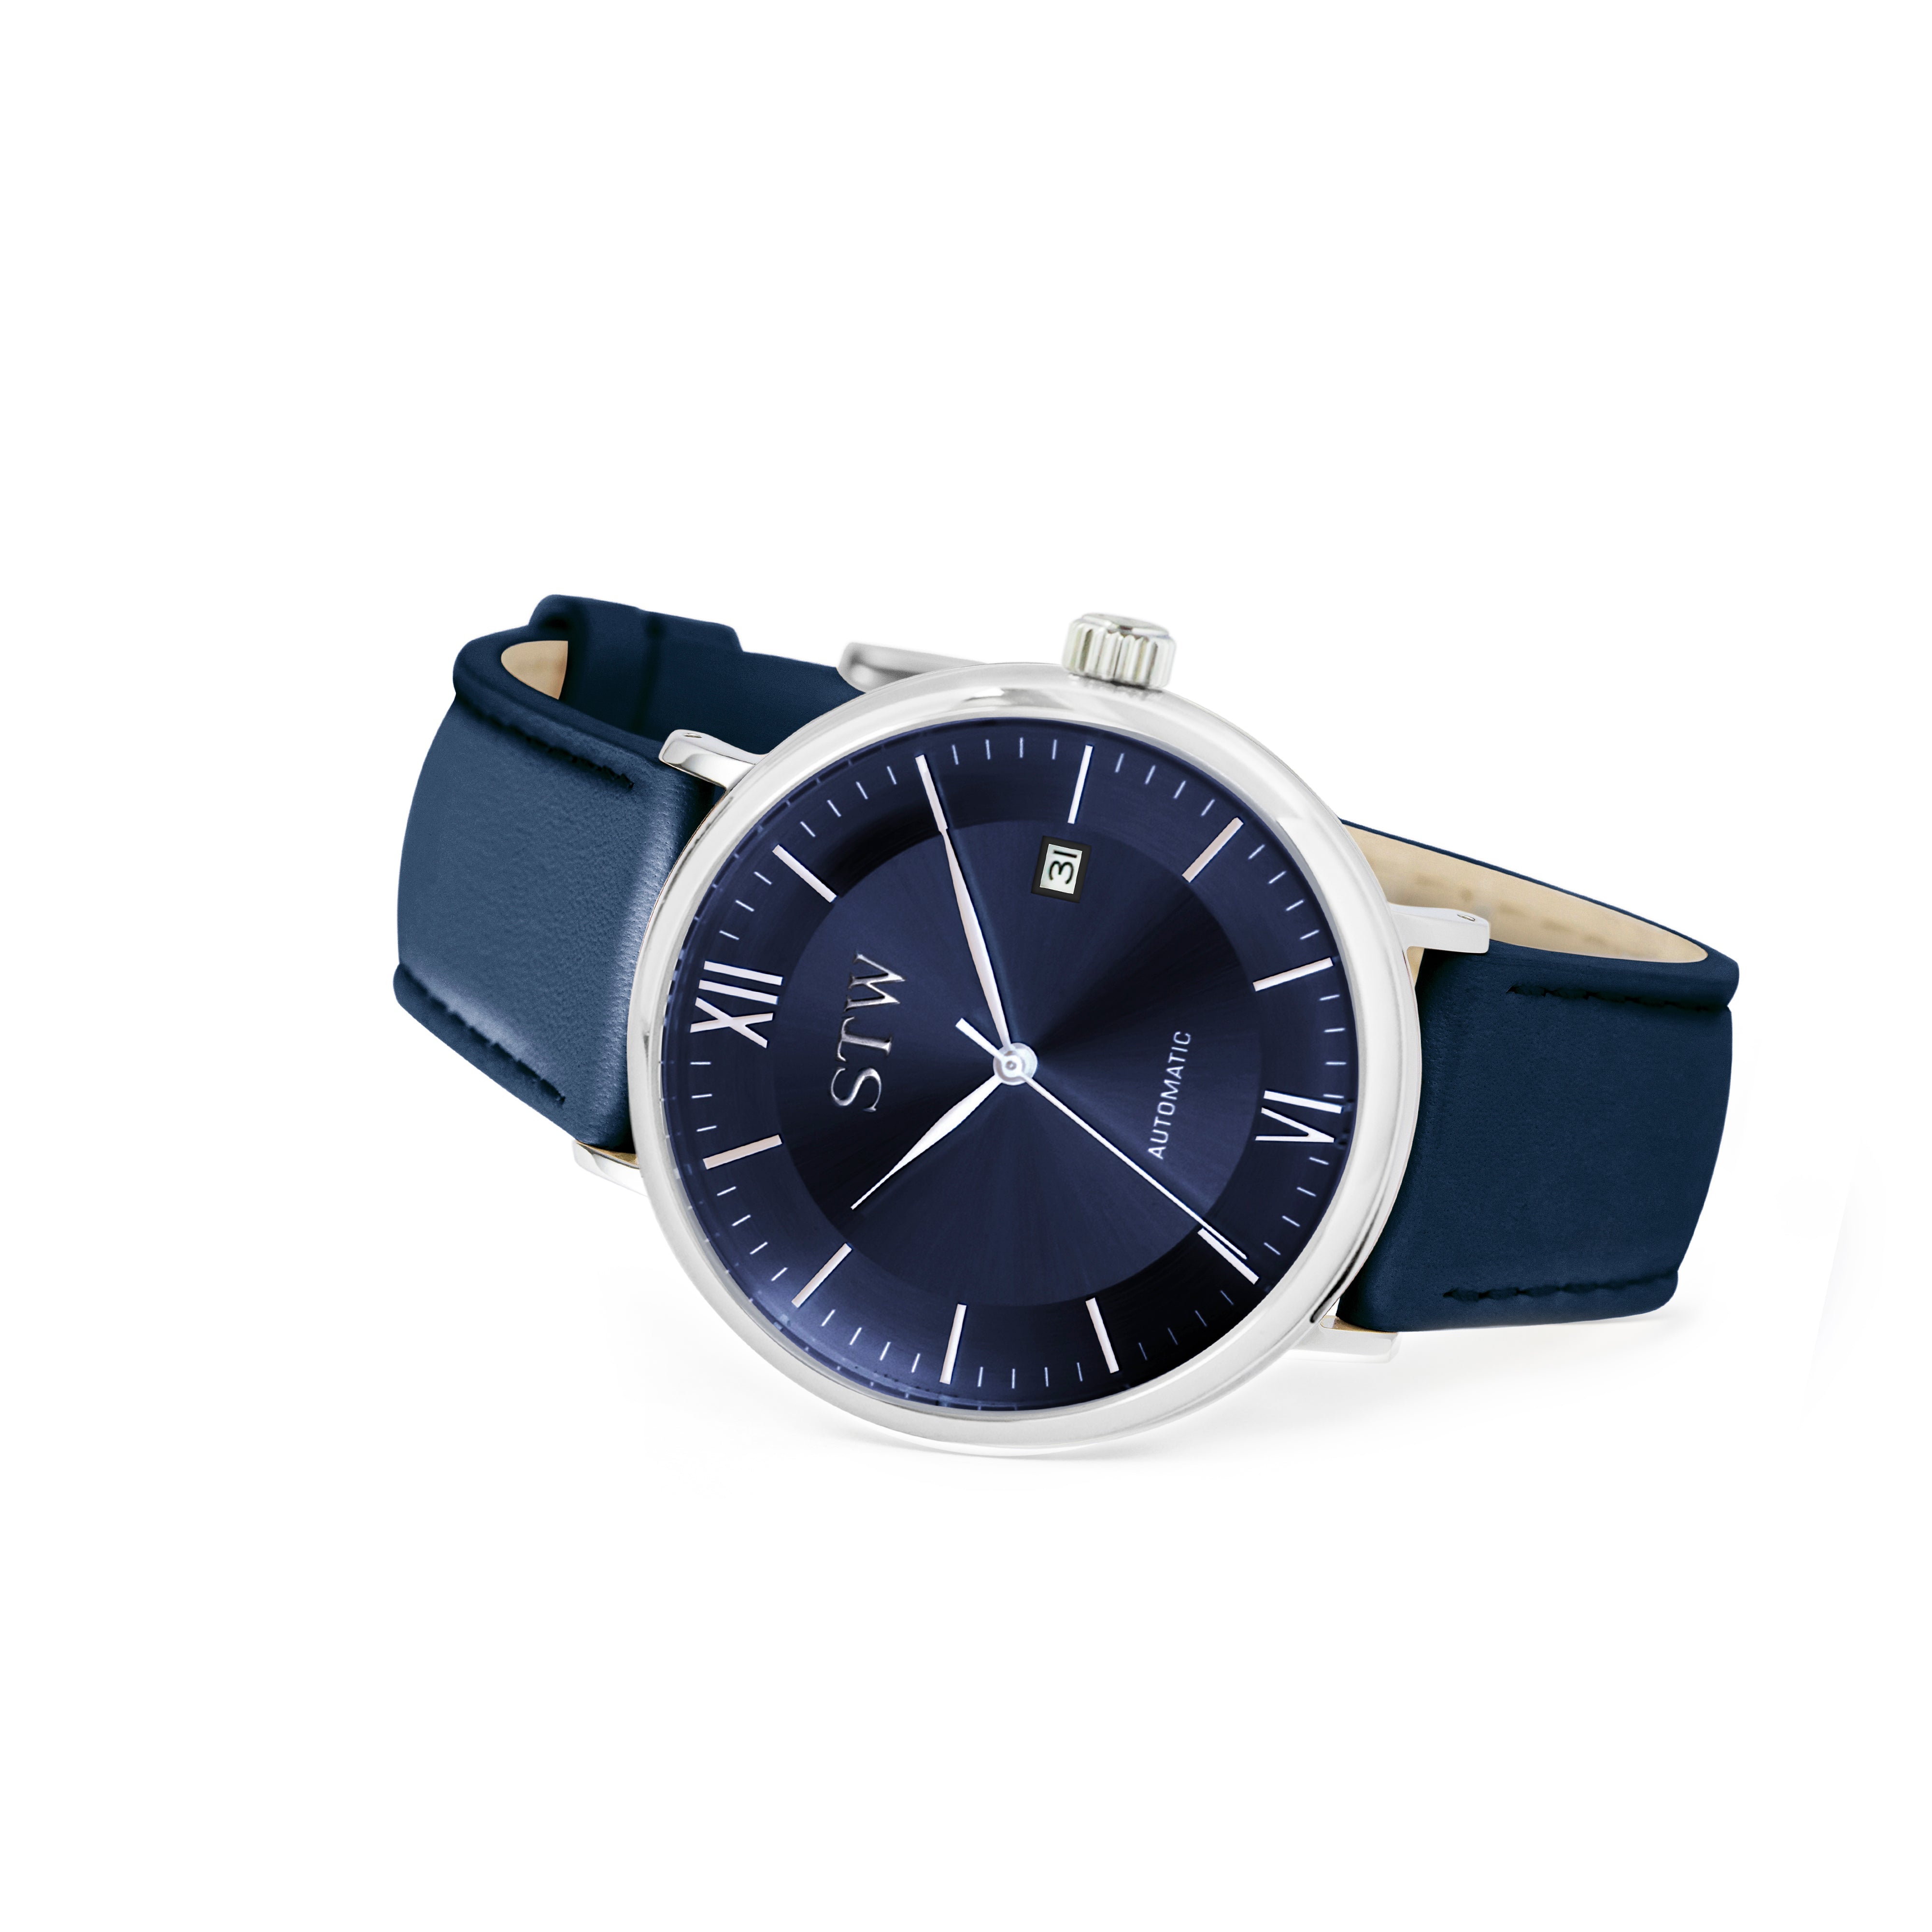 THE AUTO -  BLUE DIAL / BLUE LEATHER STRAP WATCH